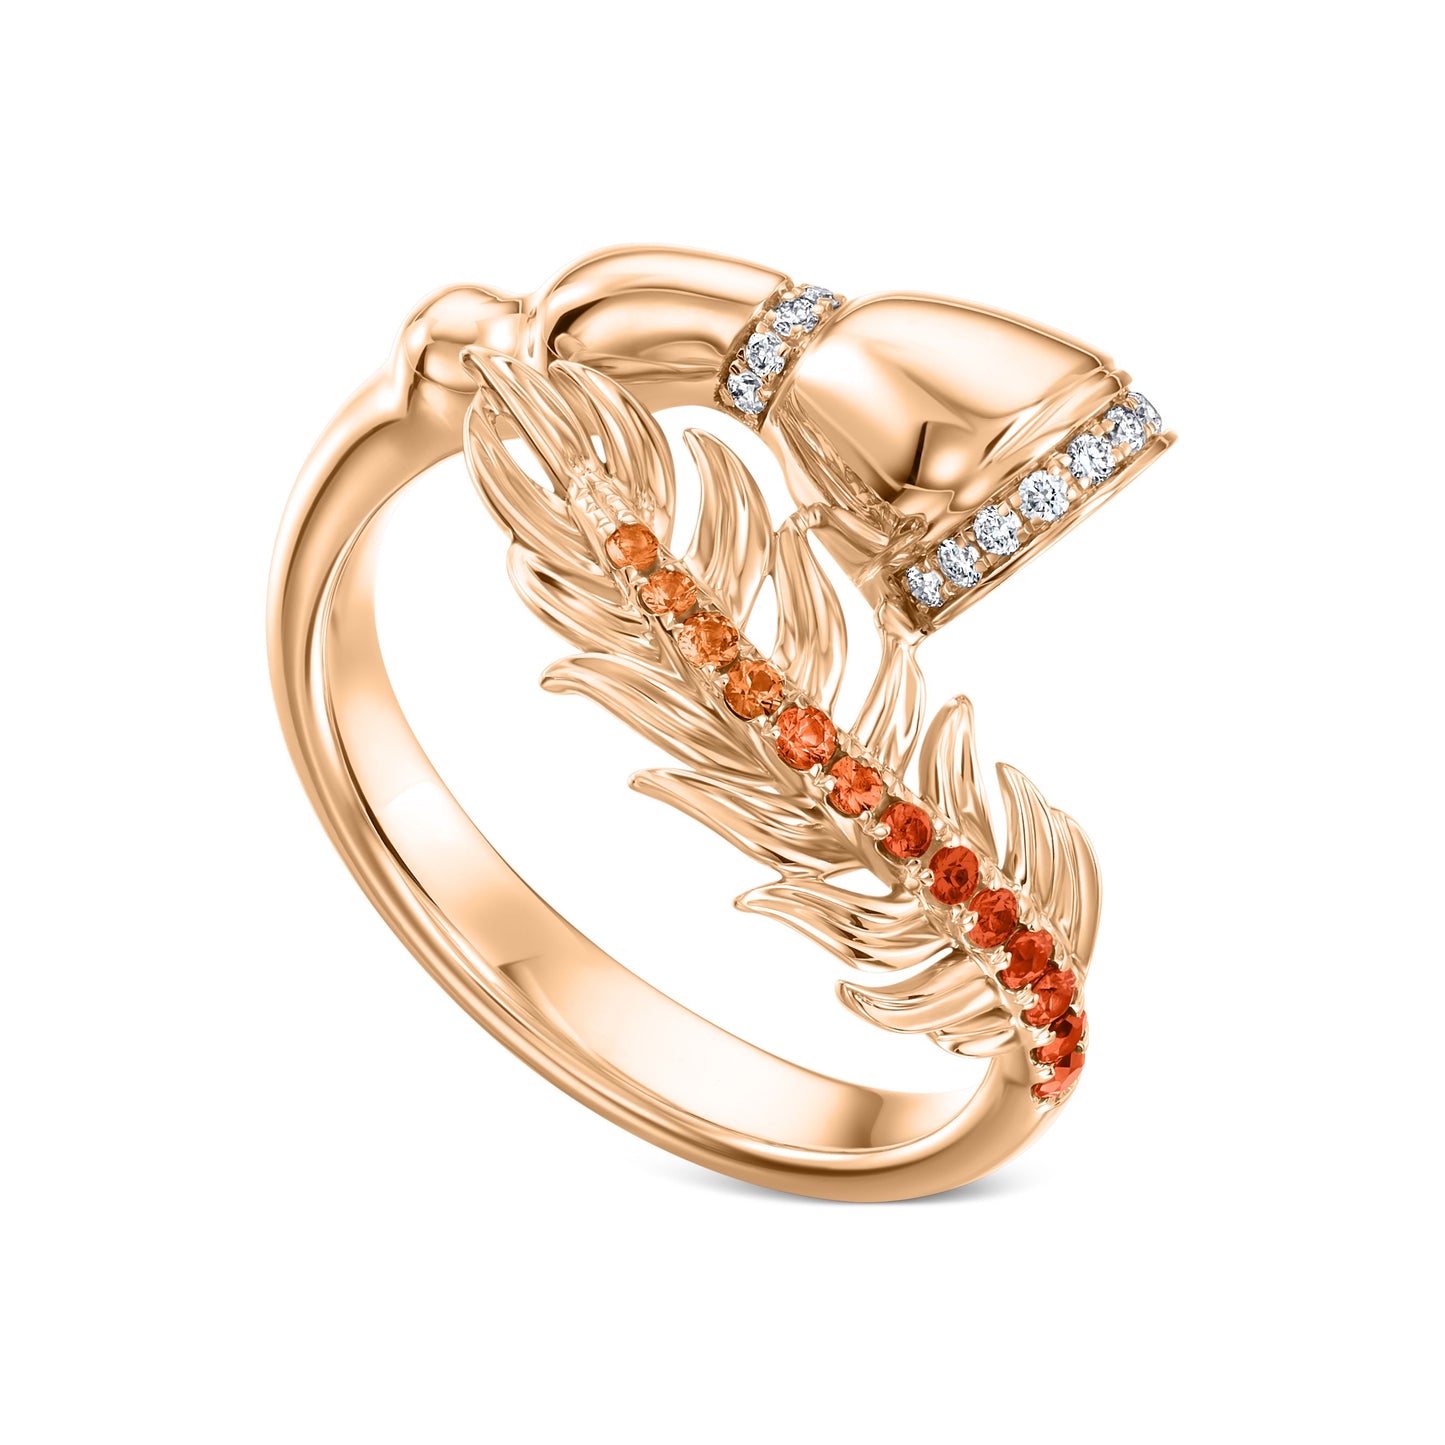 Fearless Feathers Rose Gold and Orange Sapphires Ring